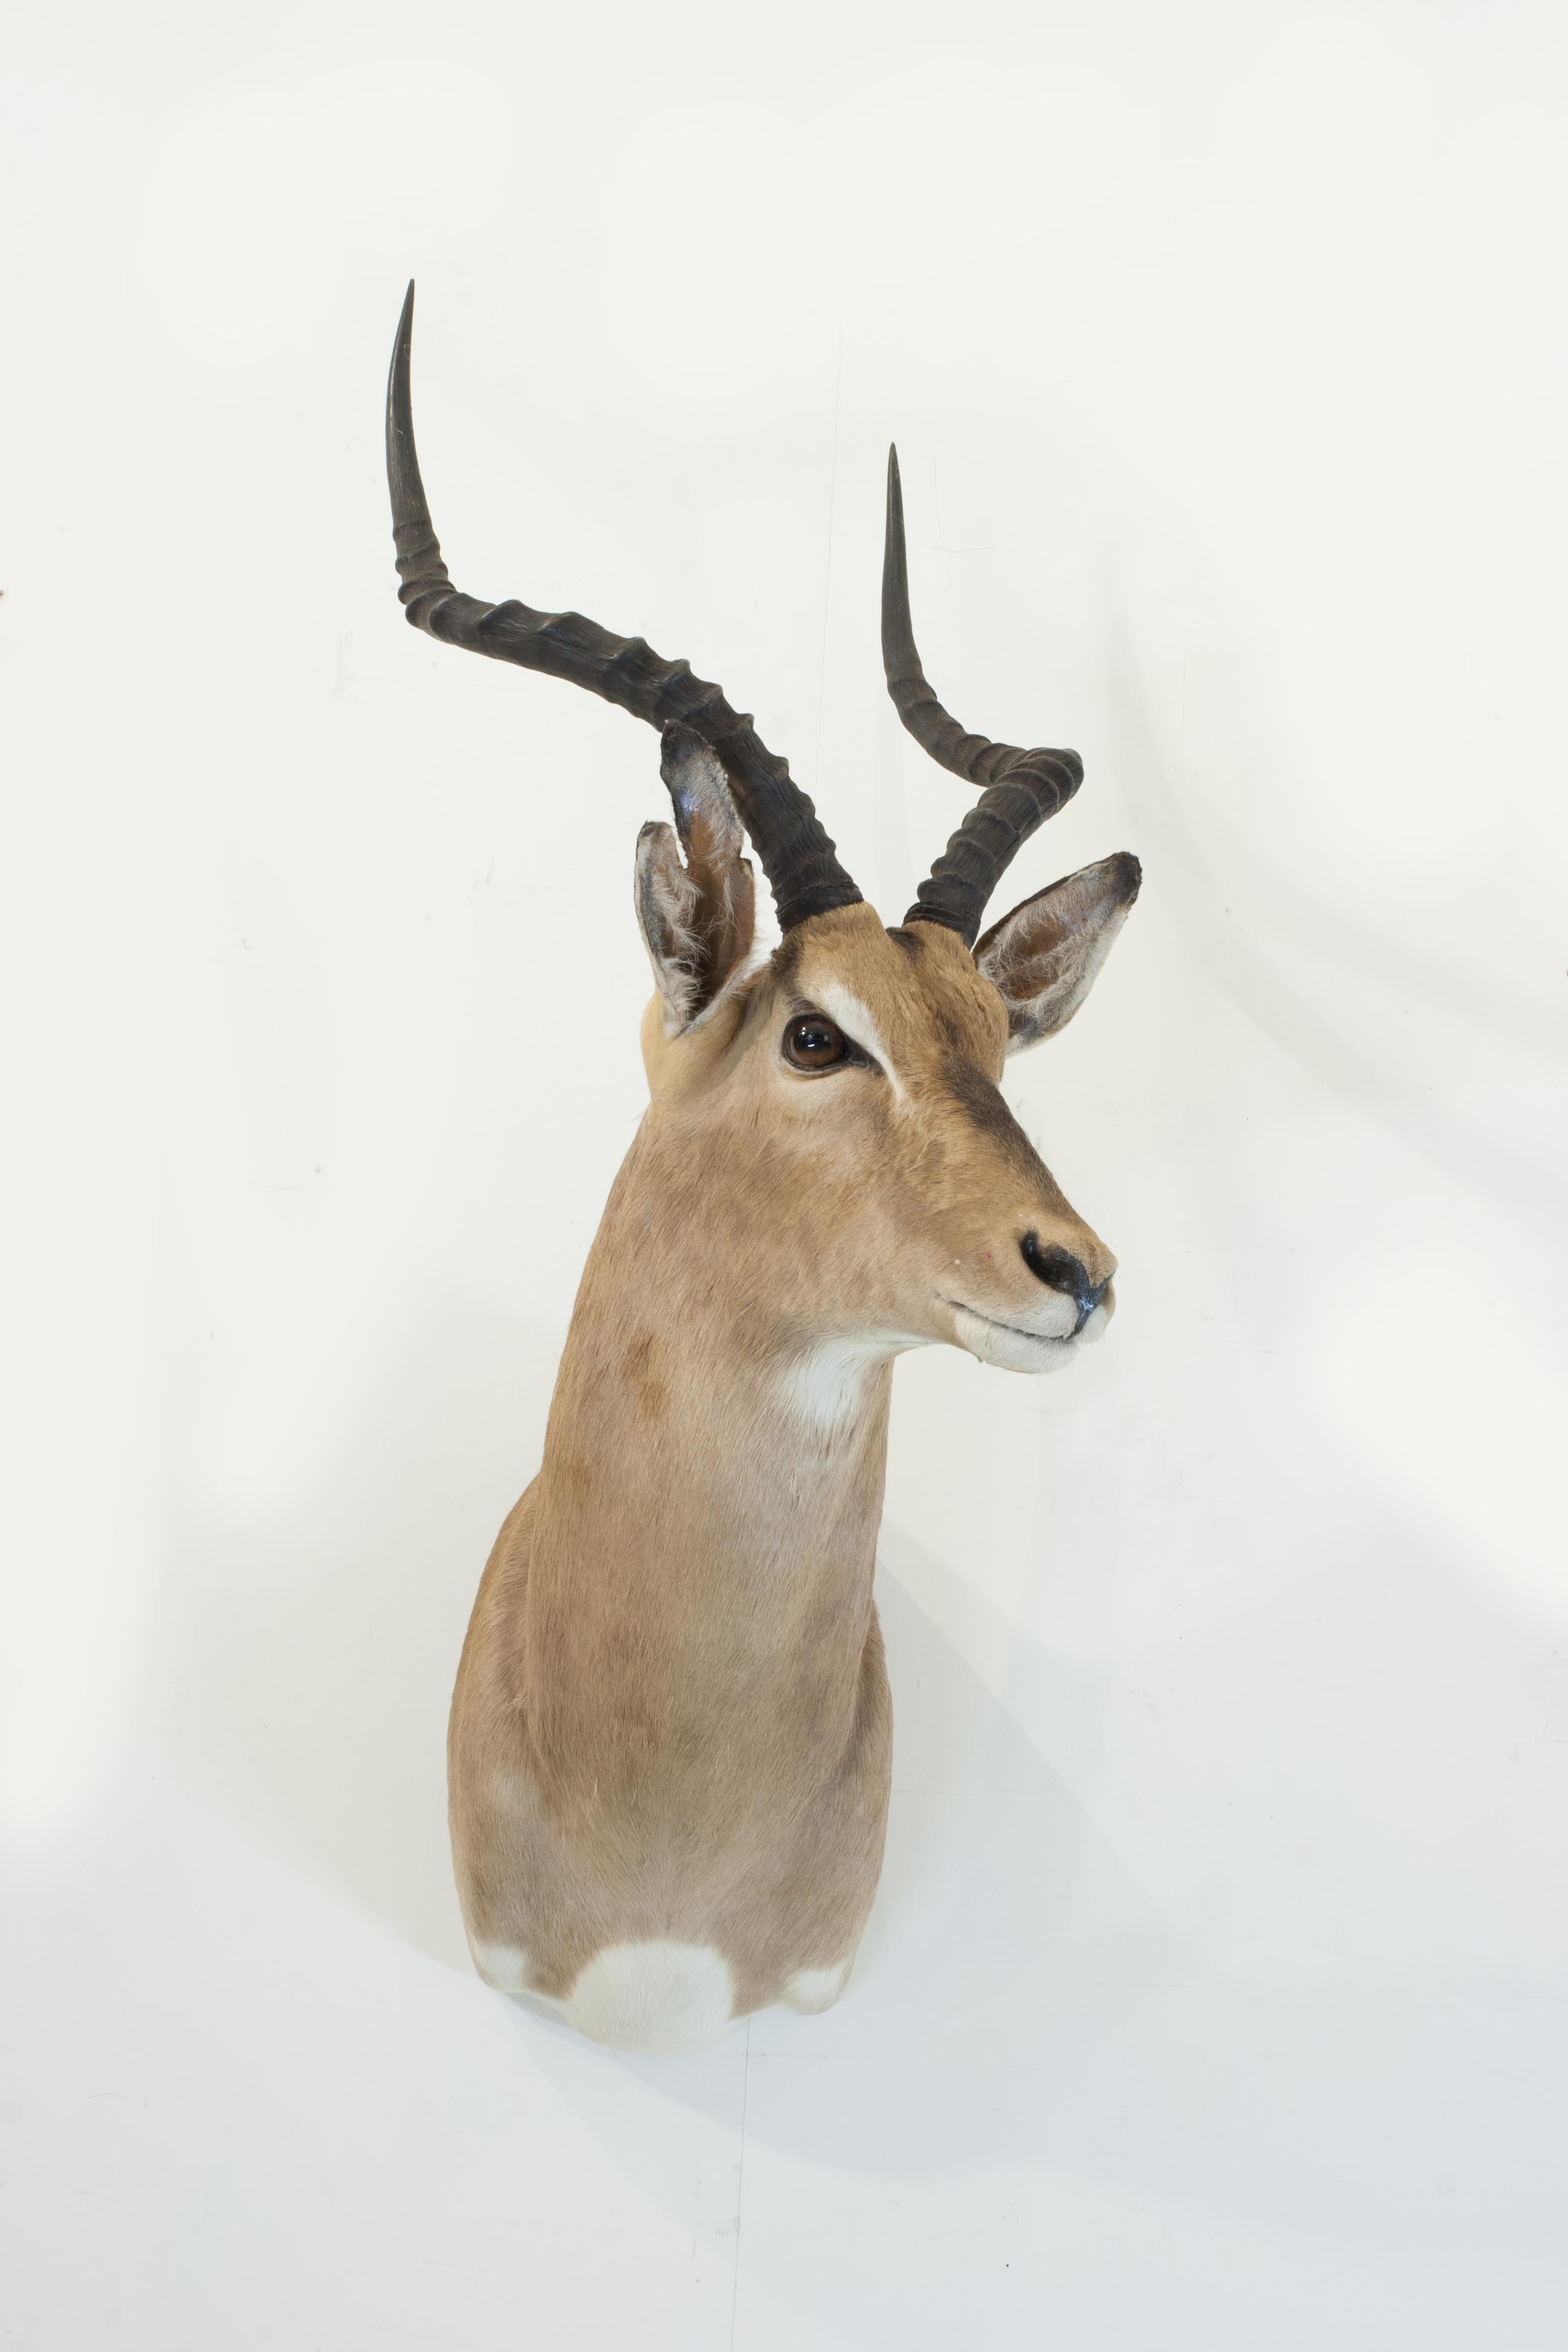 Big Game Taxidermy, Impala Shoulder Mount.
This prepared game trophy shoulder mount is of an Impala, it may not be antique but it is an impressive piece of taxidermy. The African Impala Antelope (Aepyceros melampus) is posed looking to the viewers